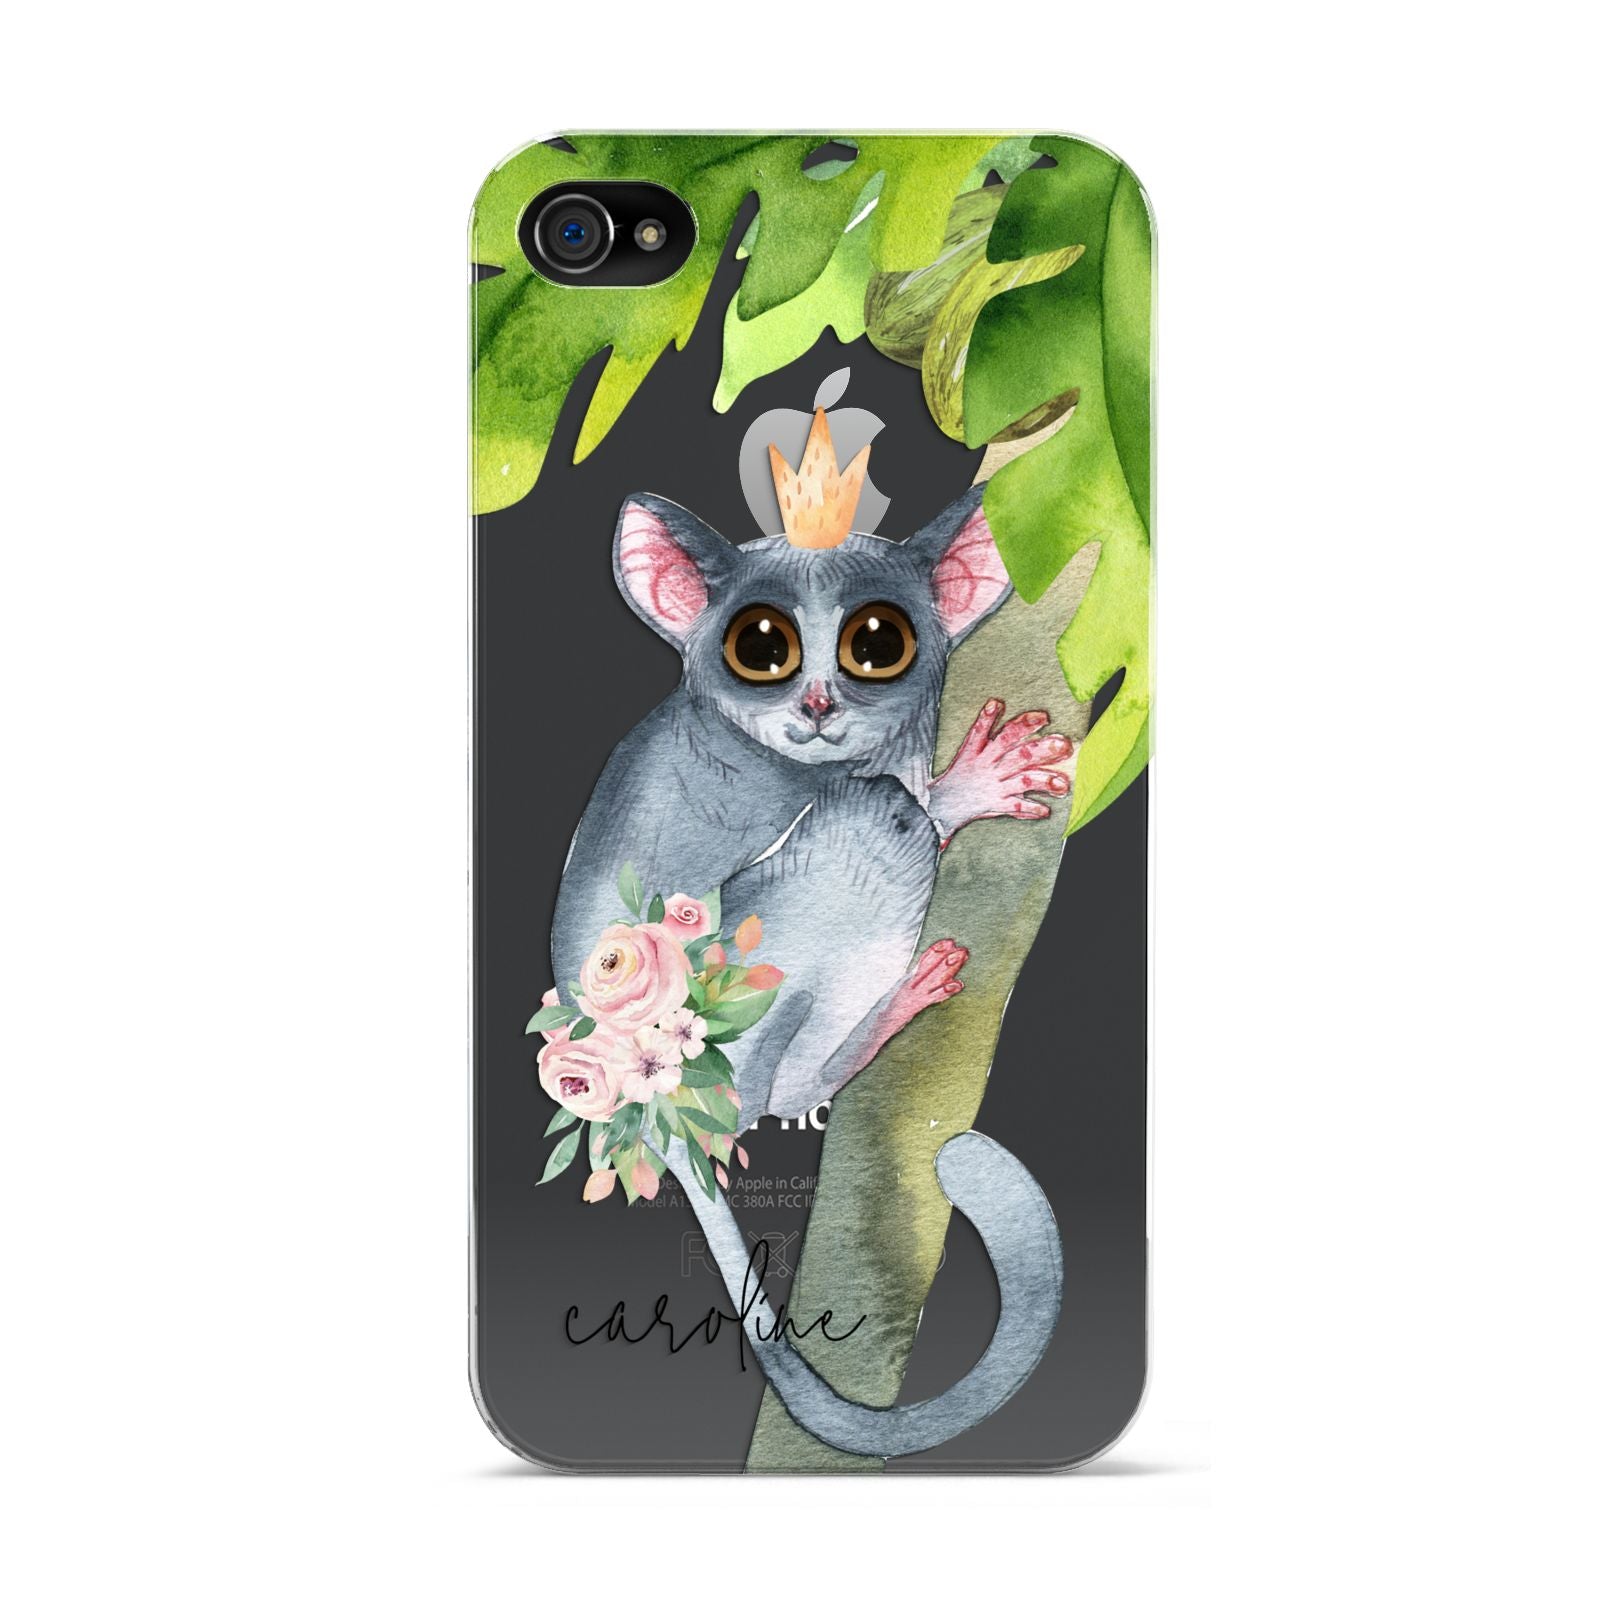 Personalised Galago Apple iPhone 4s Case